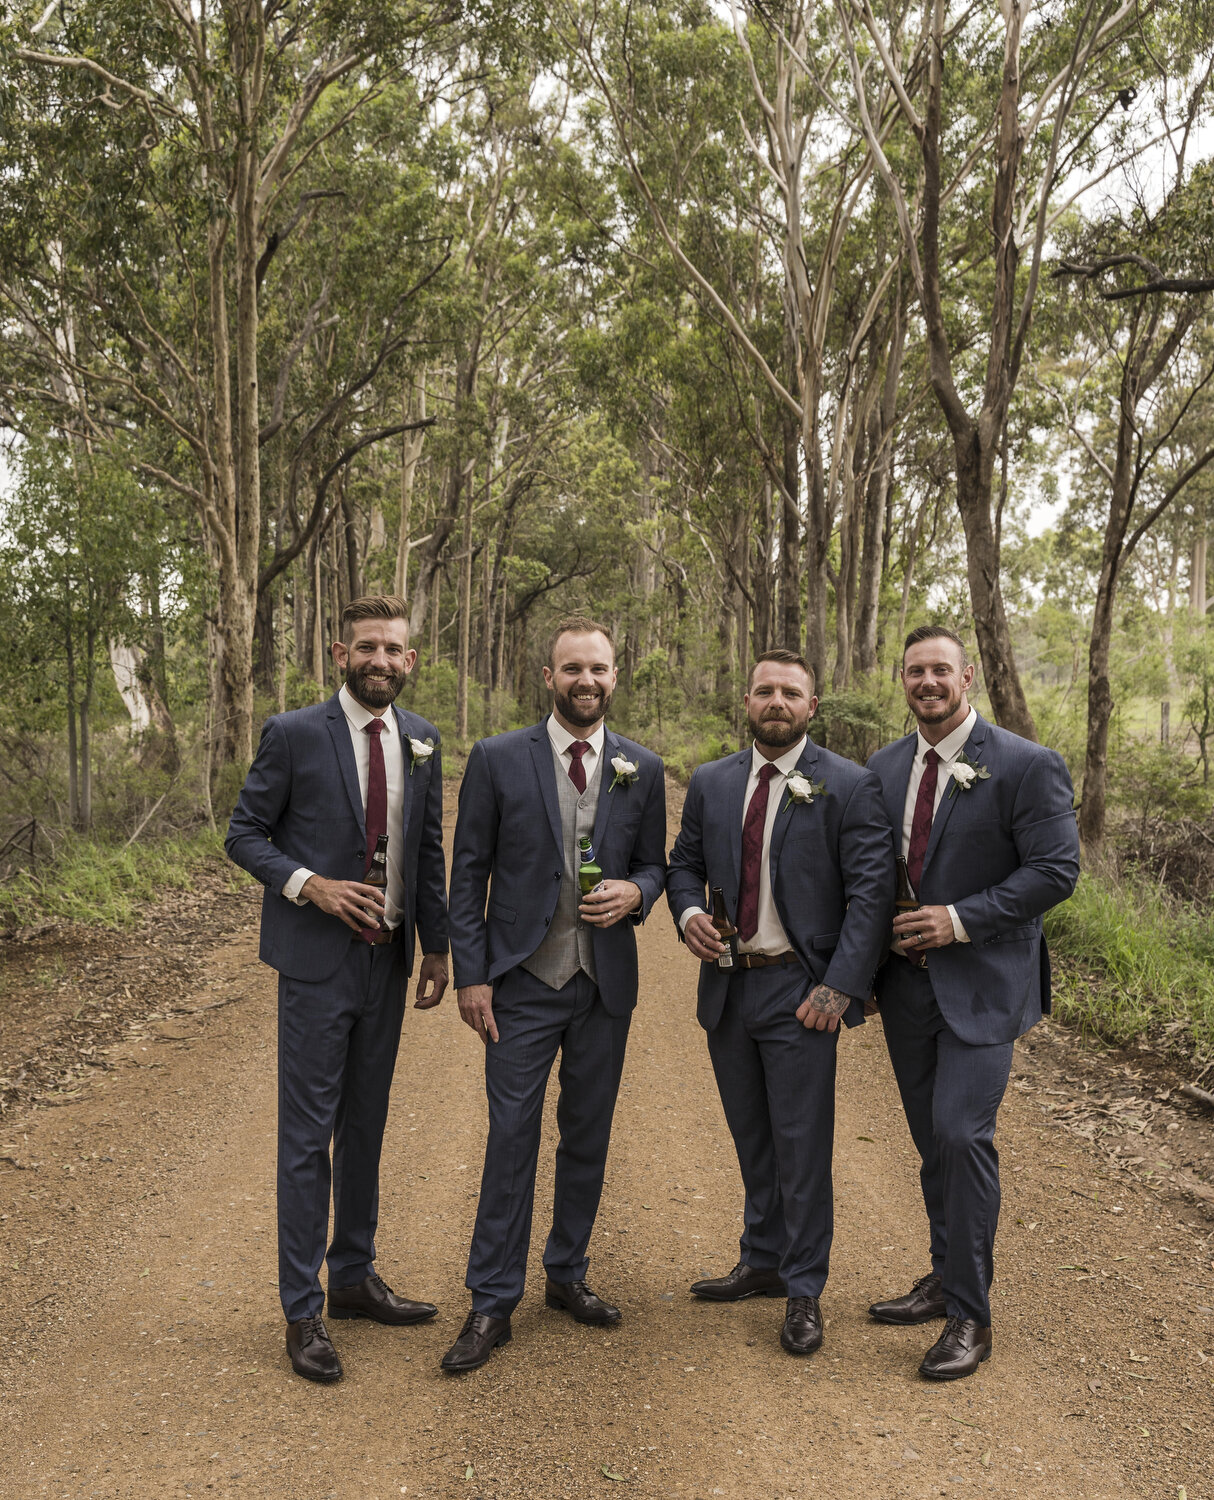  Hunter valley wedding photographer -  -Thierry Boudan Photography 